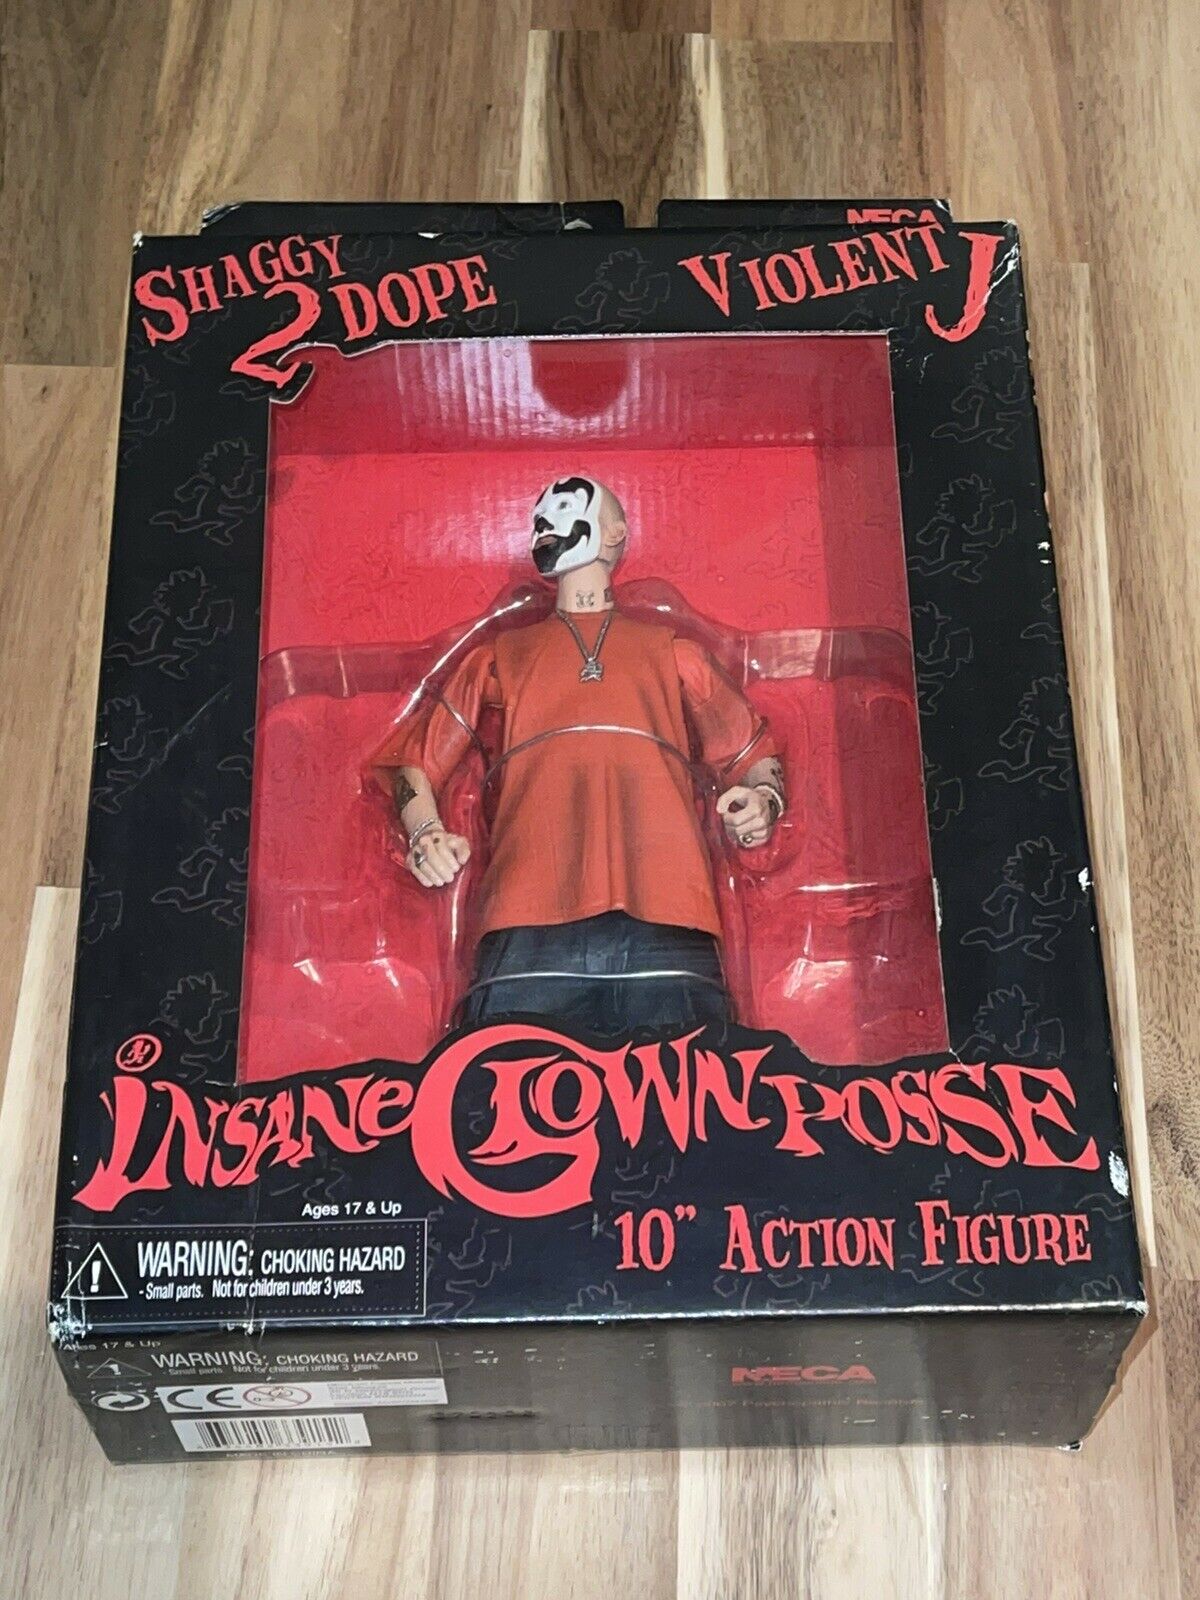 Neca Insane Clown Posse Shaggy 2 Dope 10" Action Figure Collectible New